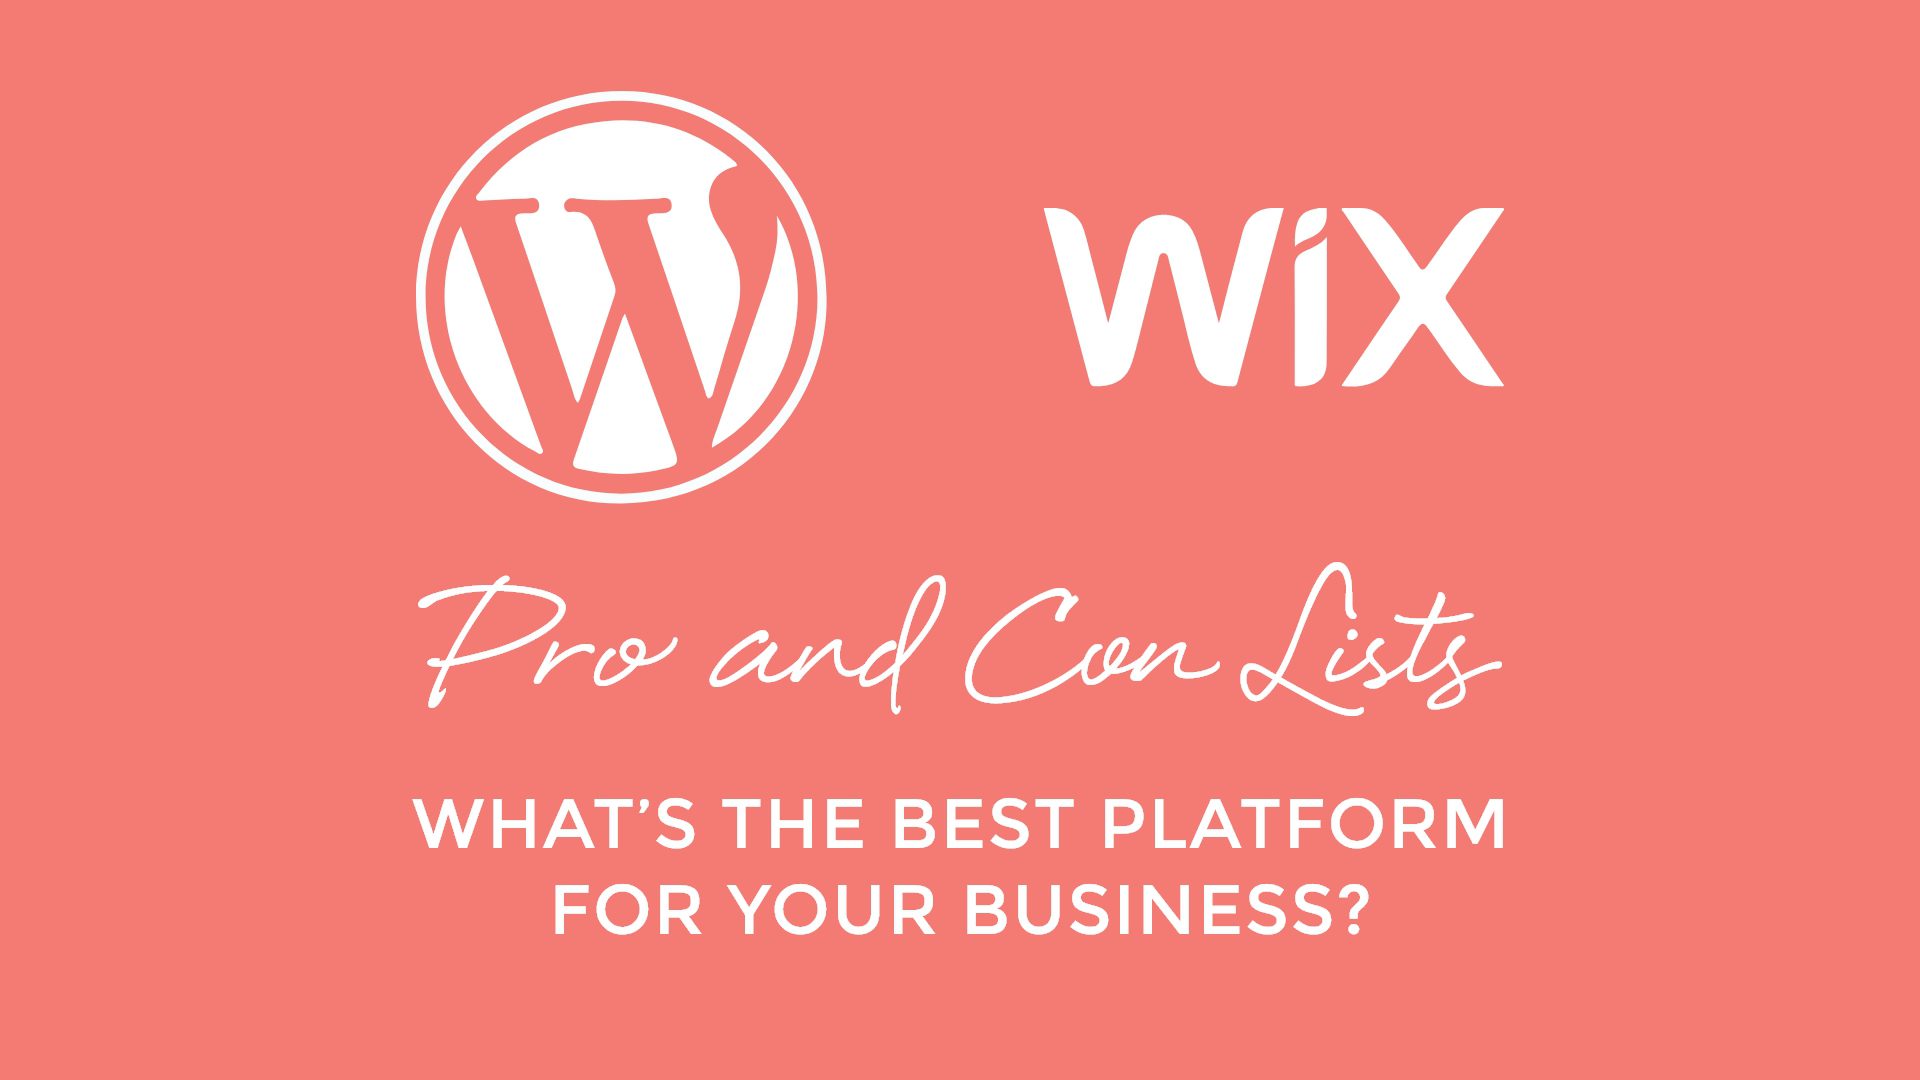 WordPress and Wix: Pros and Cons